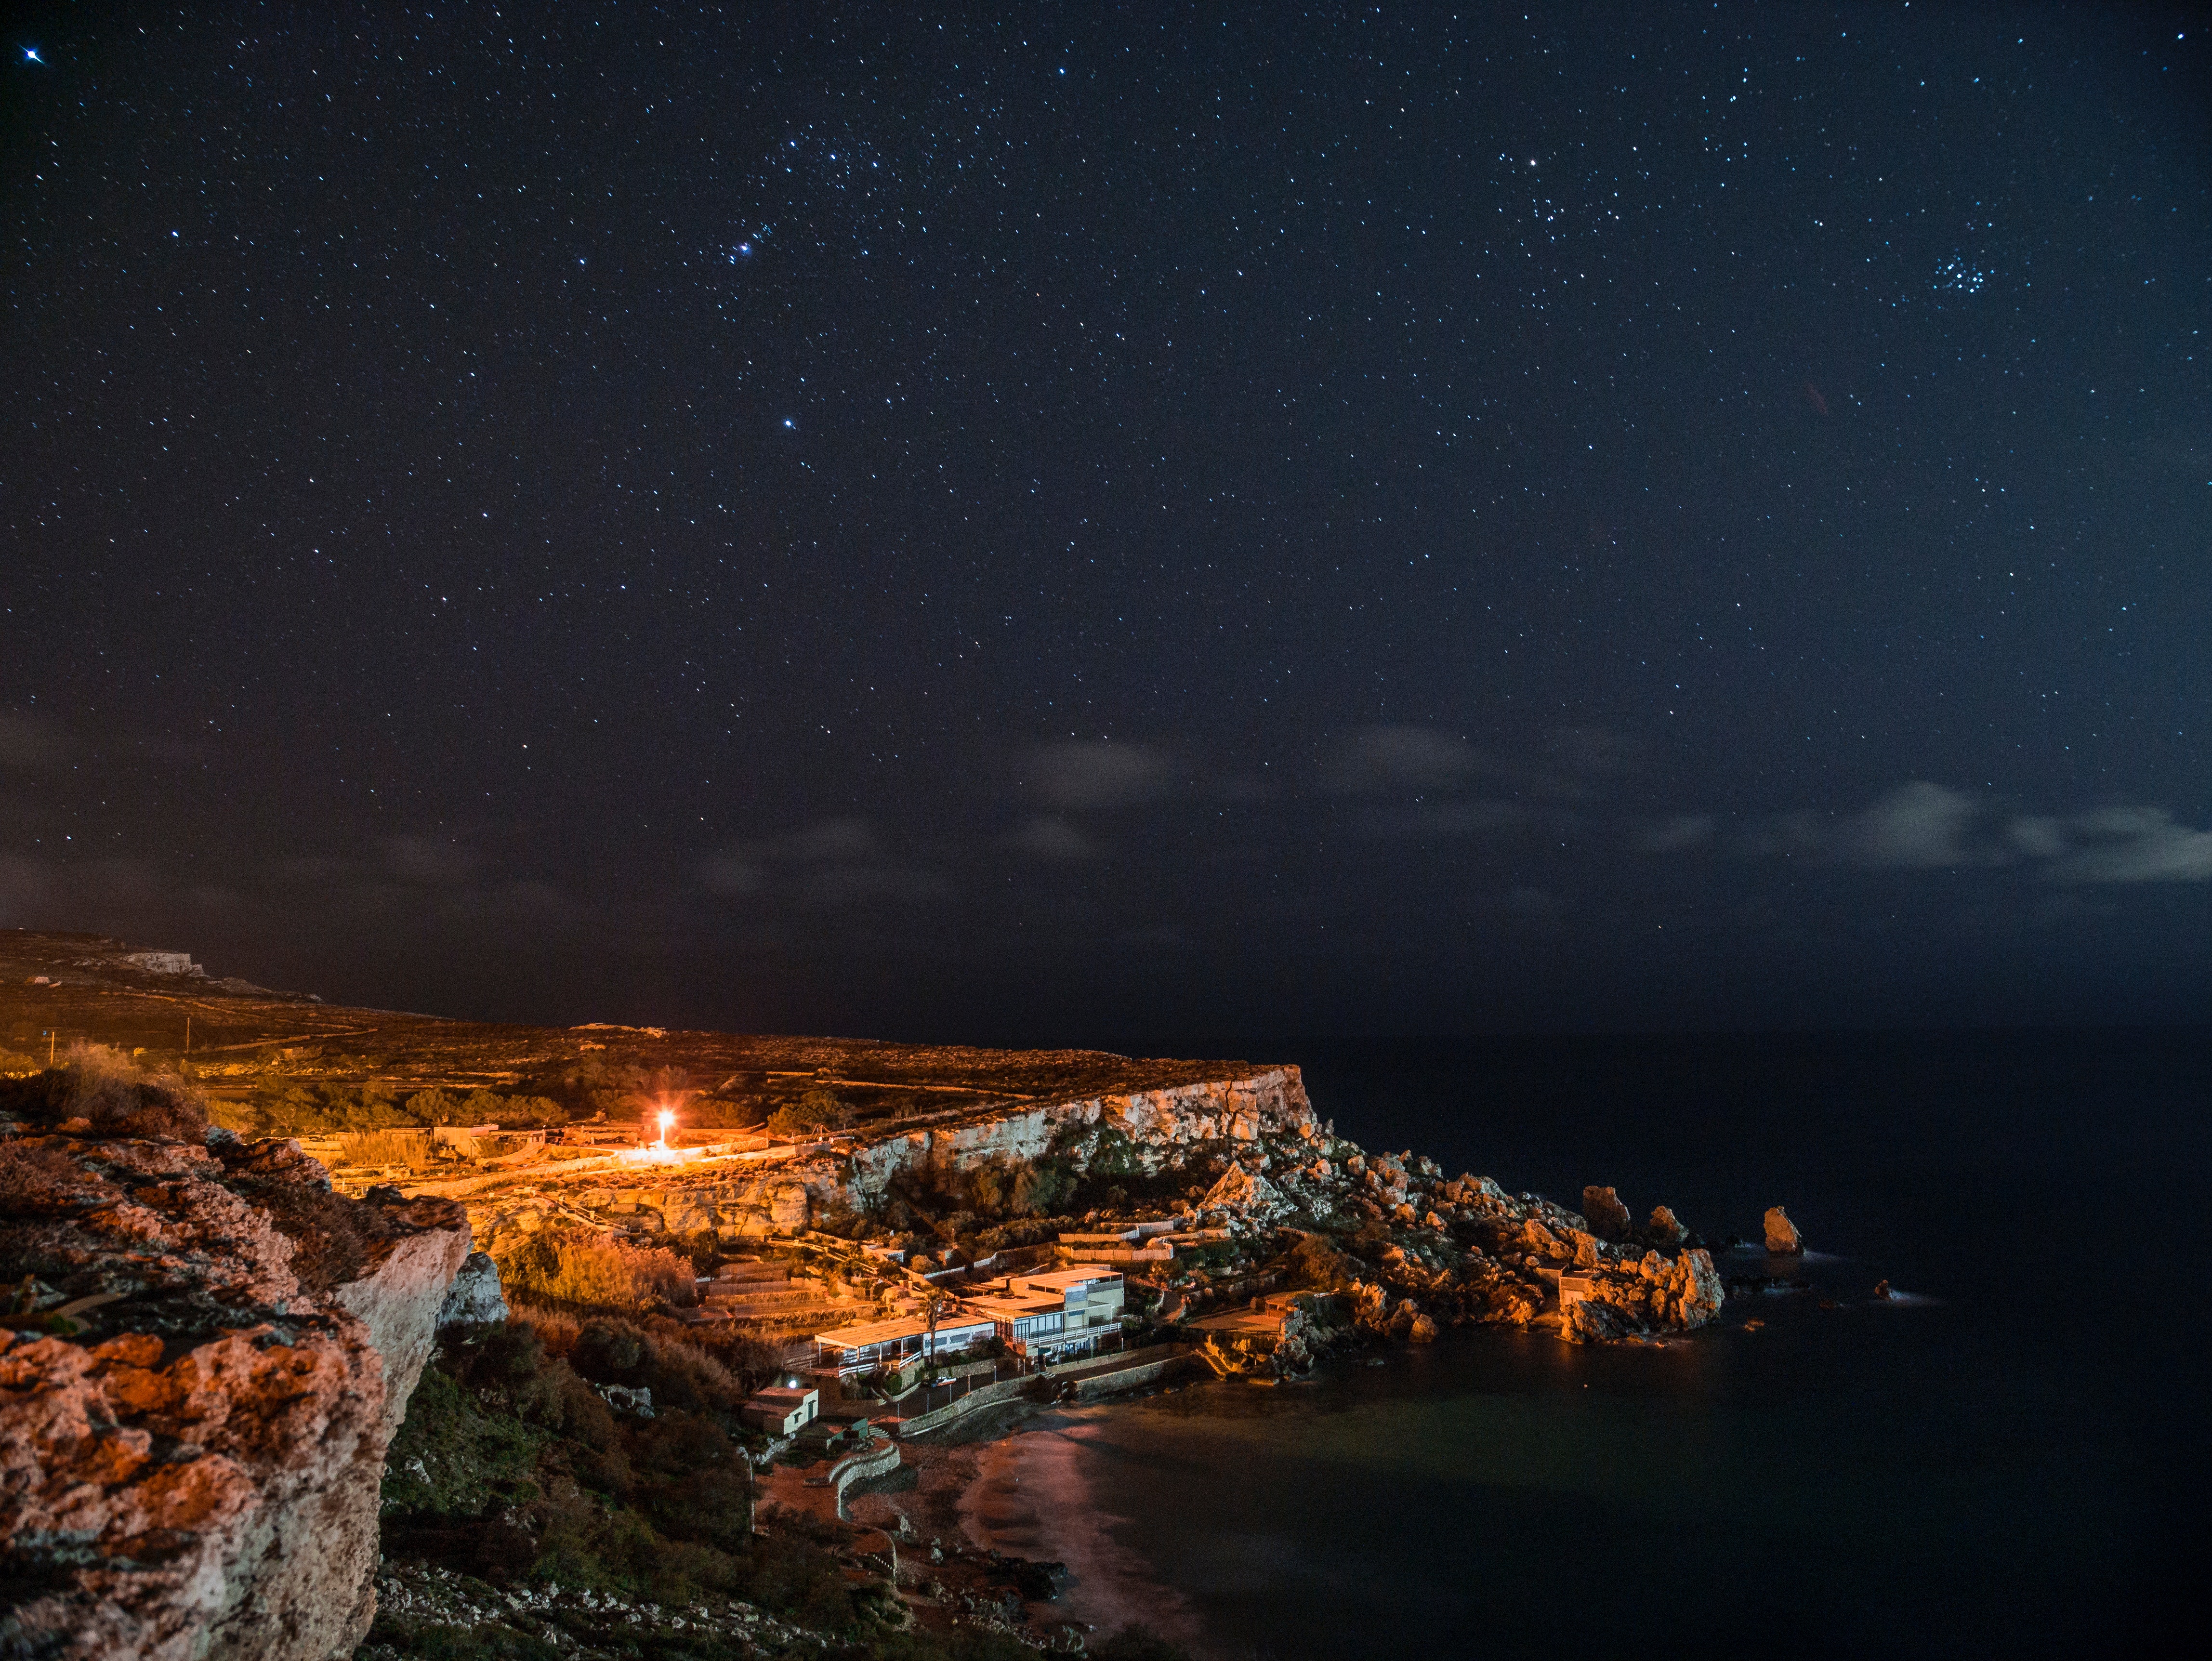 Rock cliff near body of water under clouds and sky during nighttime photo